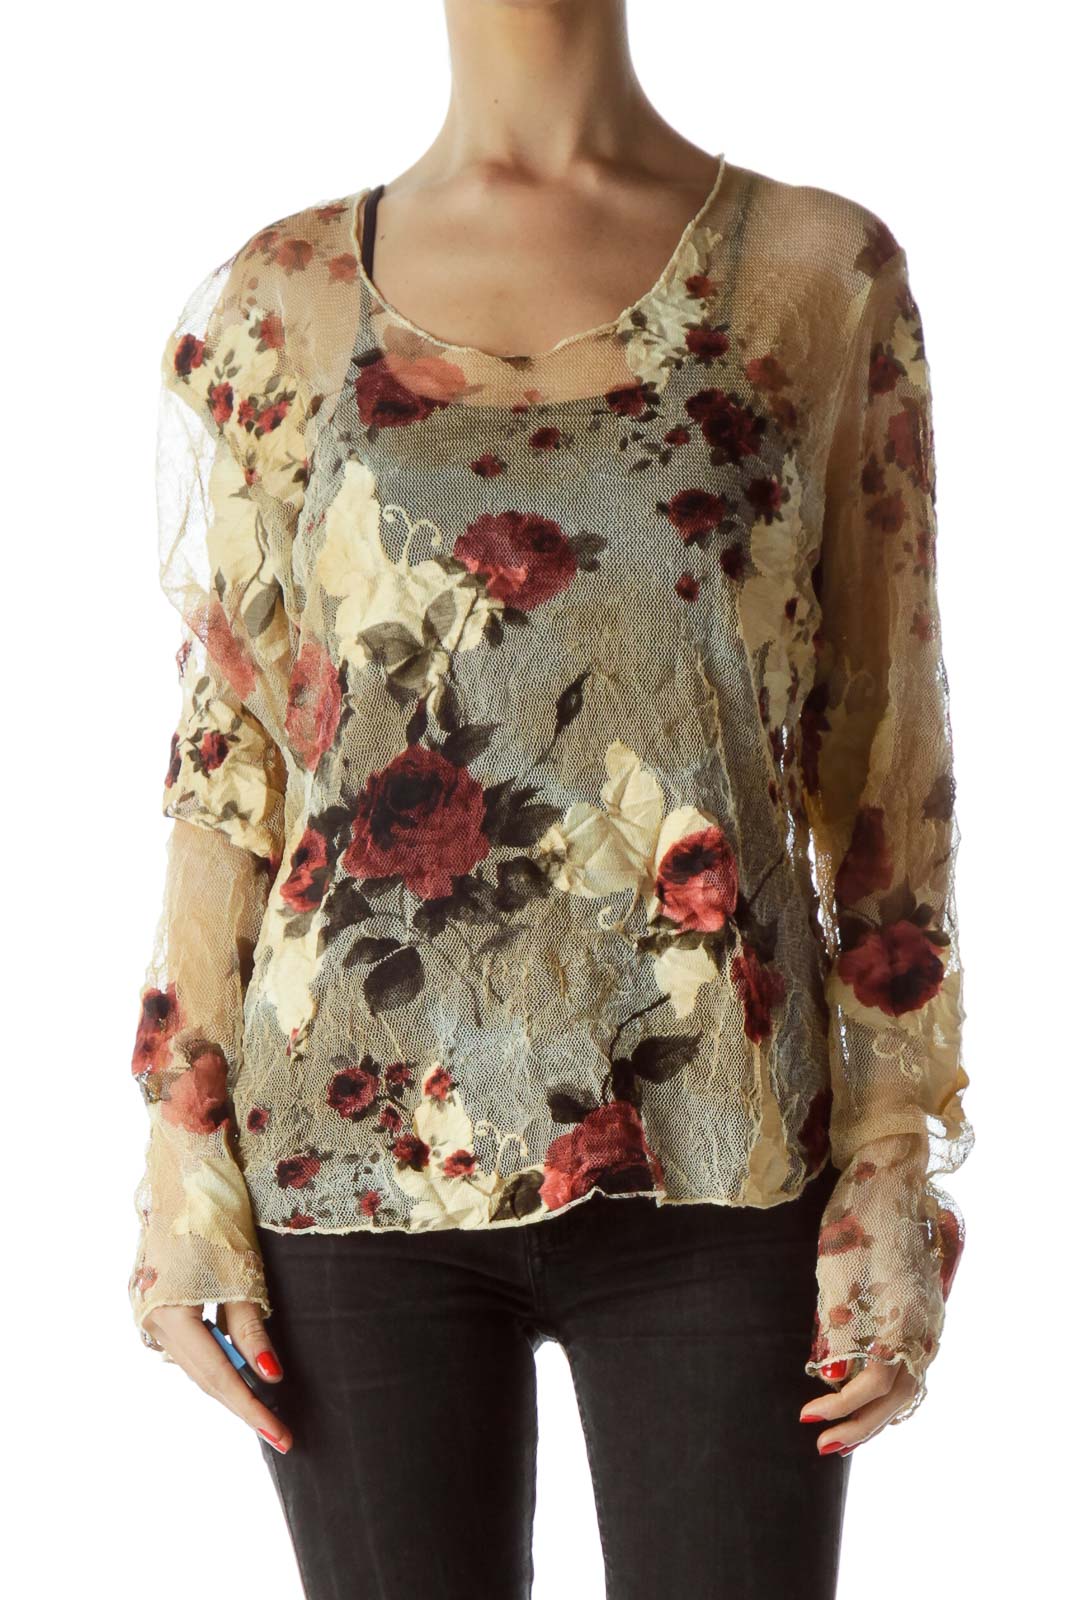 Beige Burgundy Floral Print Lace Long-Sleeve Top Front